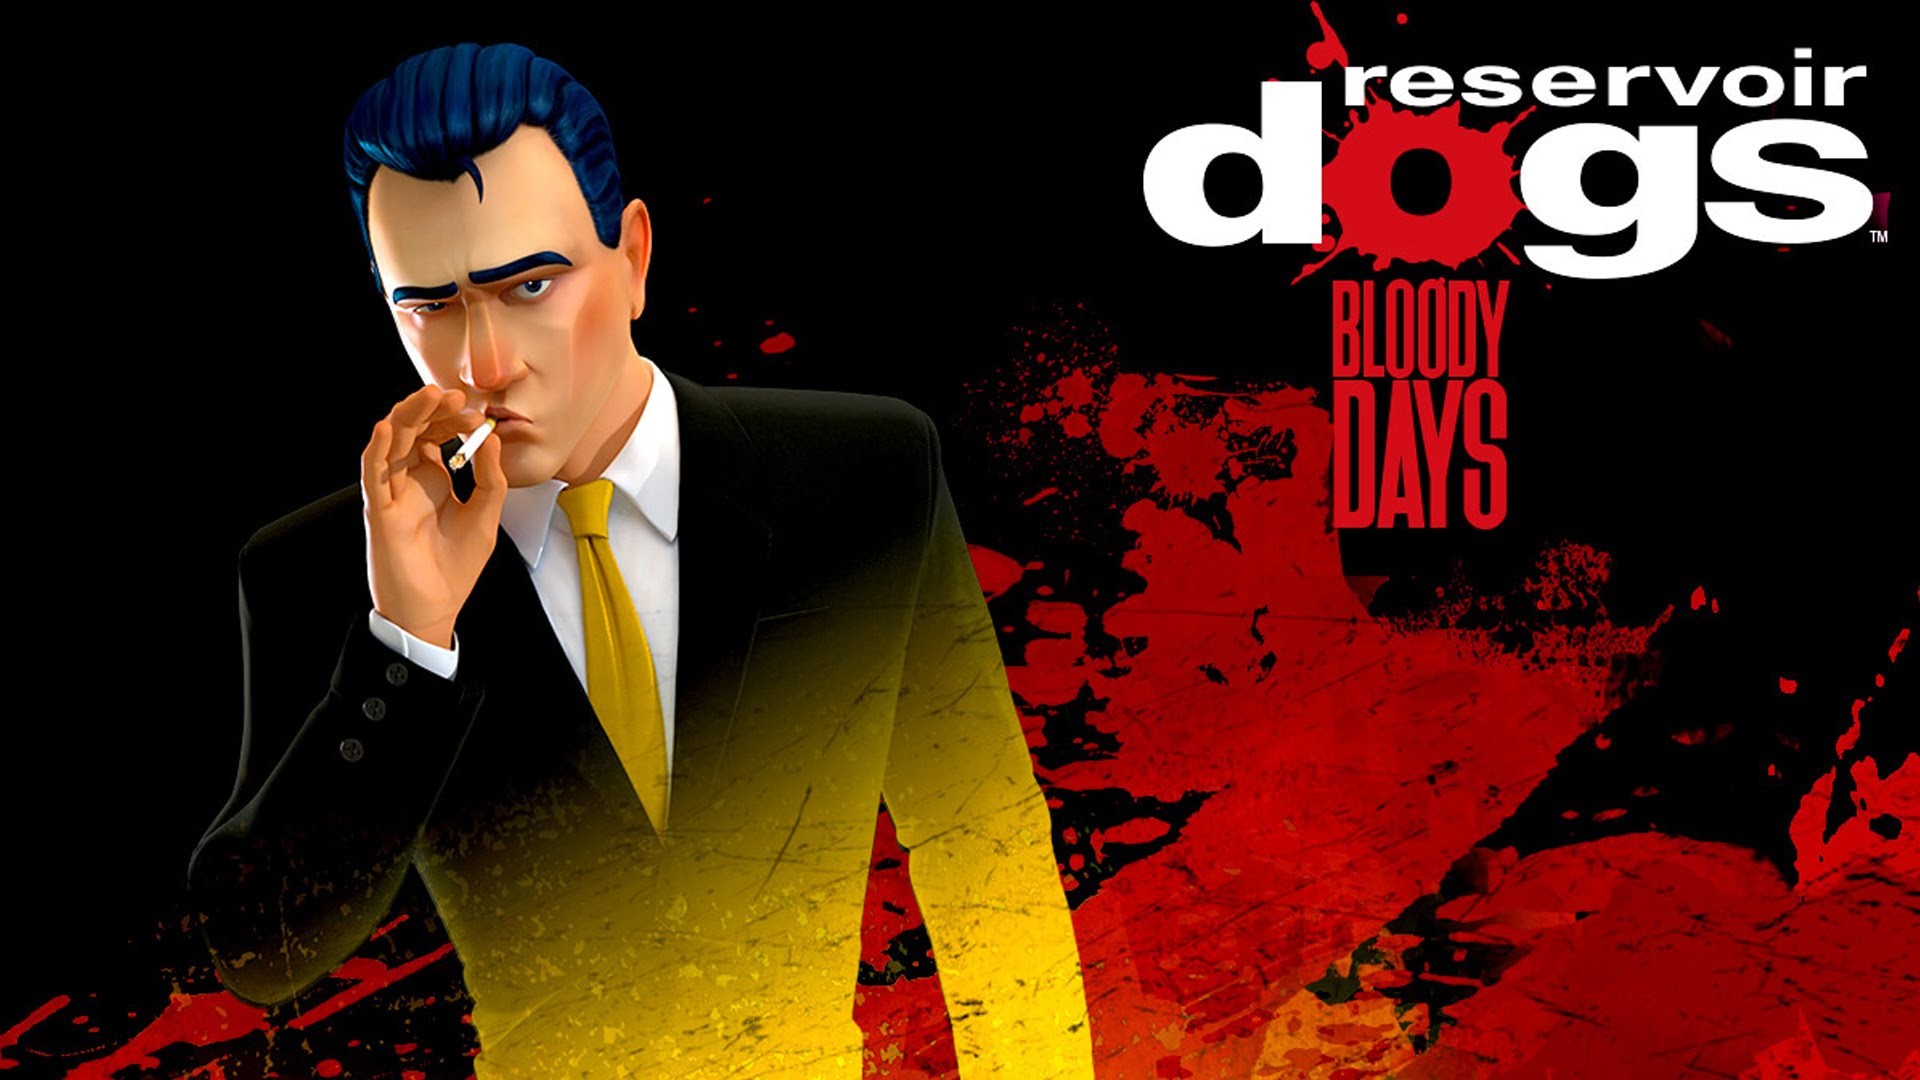 1920x1080 Reservoir Dogs: Bloody Days - Exclusive Developer Let's Play